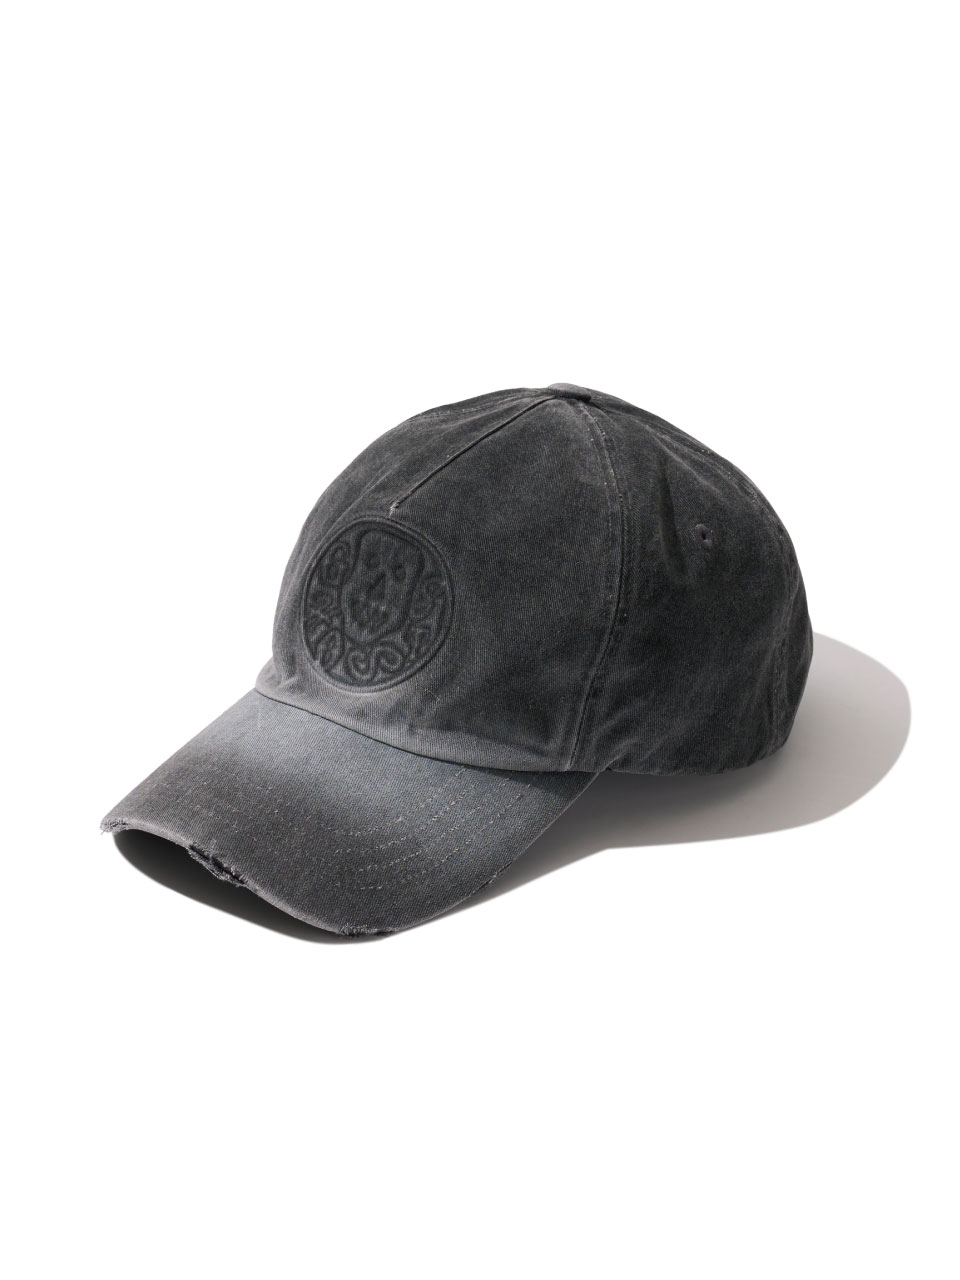 ETCE - GHOST EMBO WASHED CAP (ASH)